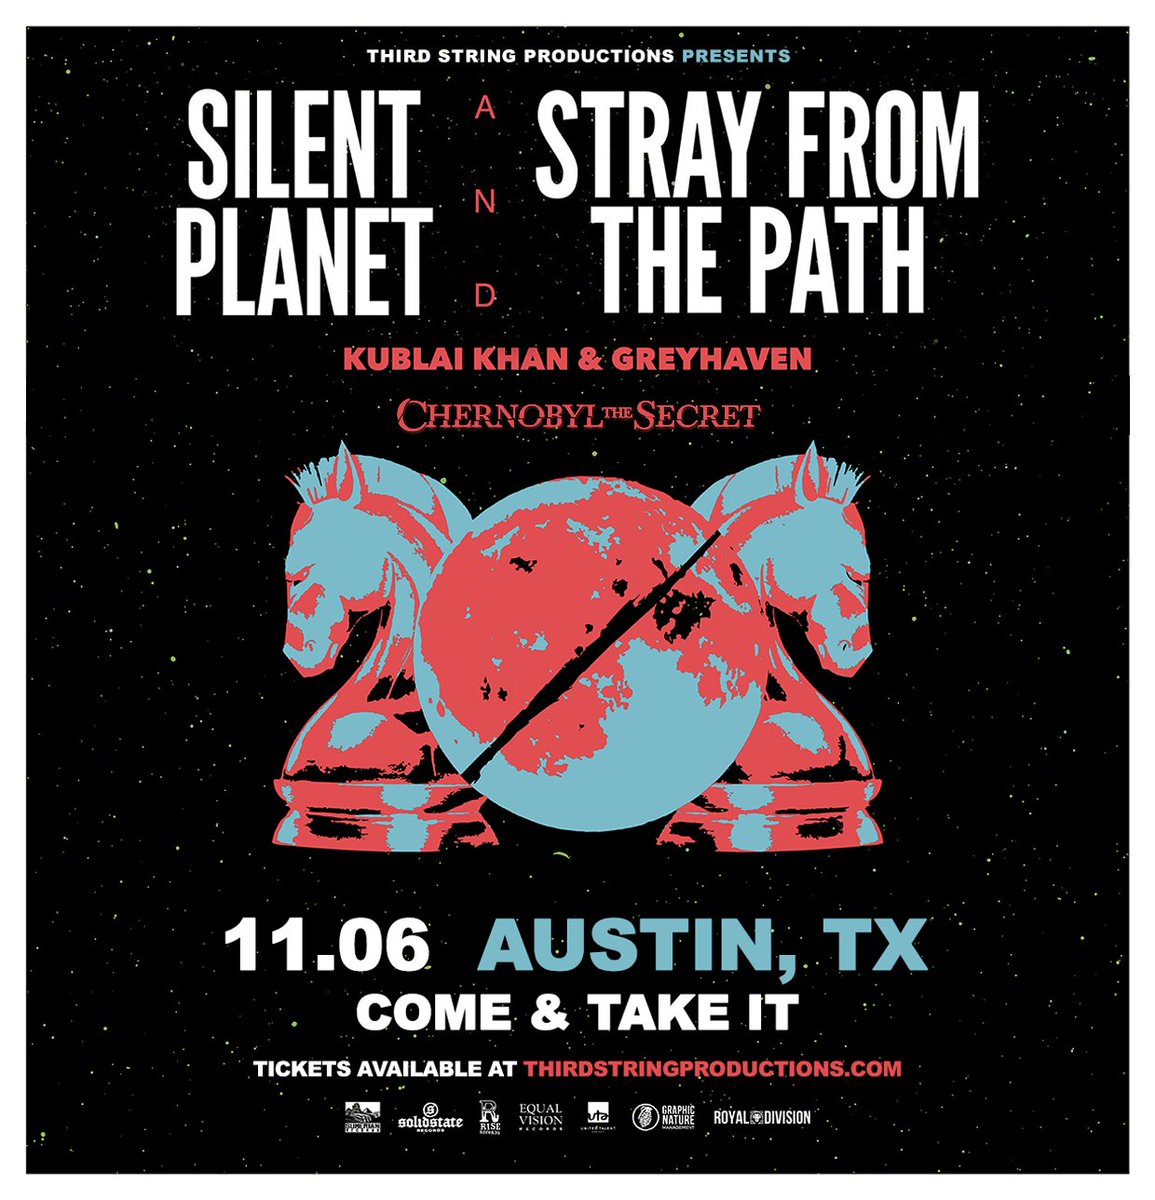 This will be our last show of the year on November 6th at @catilive! Don't miss out! Hit us up for tickets. 🤘 #silentplanet #strayfromthepath #greyhaven #kublaikhan #chernobylthesecret #comeandtakeitlive #austintexas #metal #supportlocalmusic